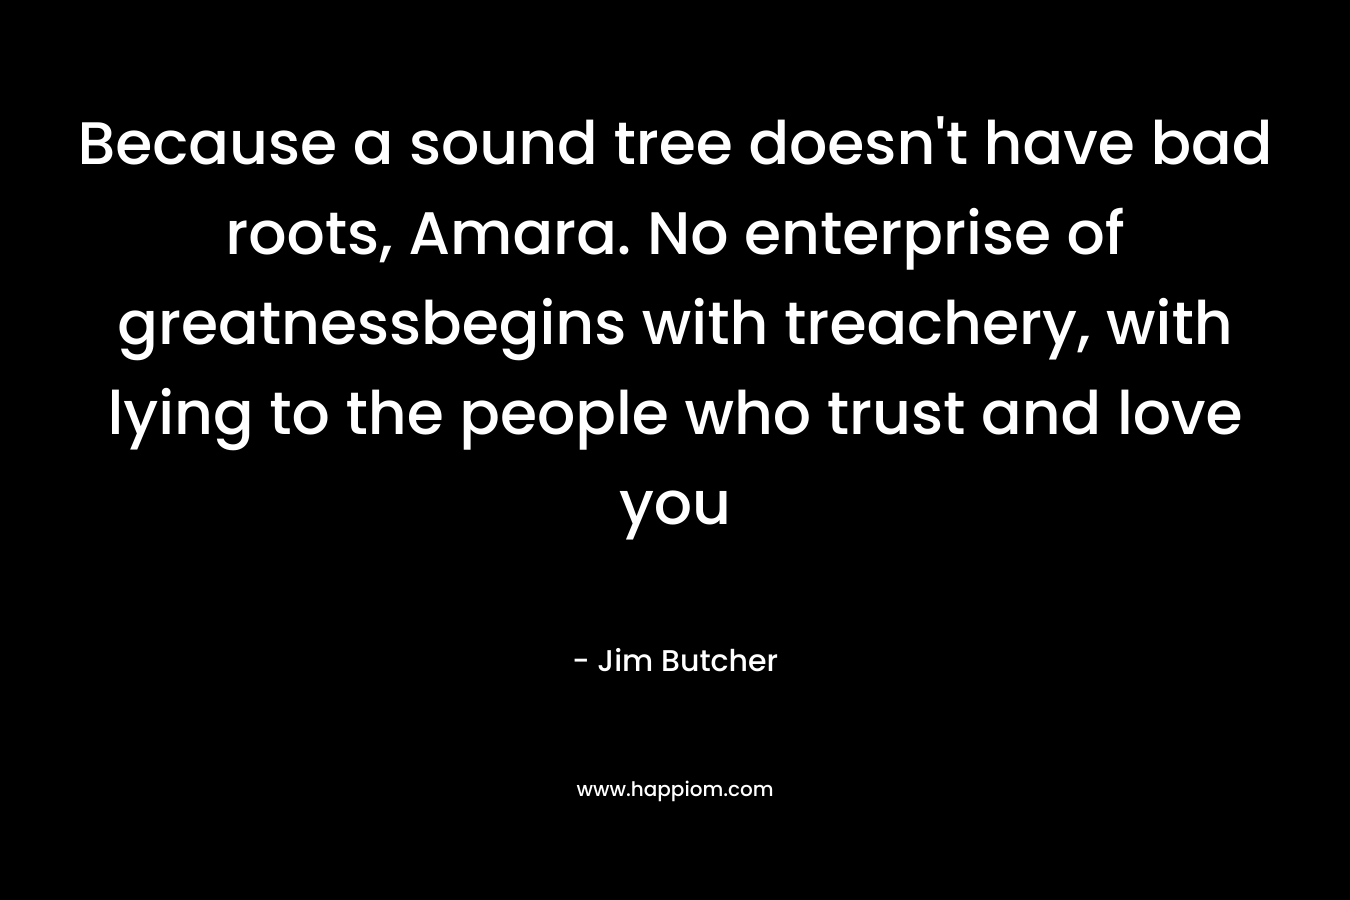 Because a sound tree doesn’t have bad roots, Amara. No enterprise of greatnessbegins with treachery, with lying to the people who trust and love you – Jim Butcher